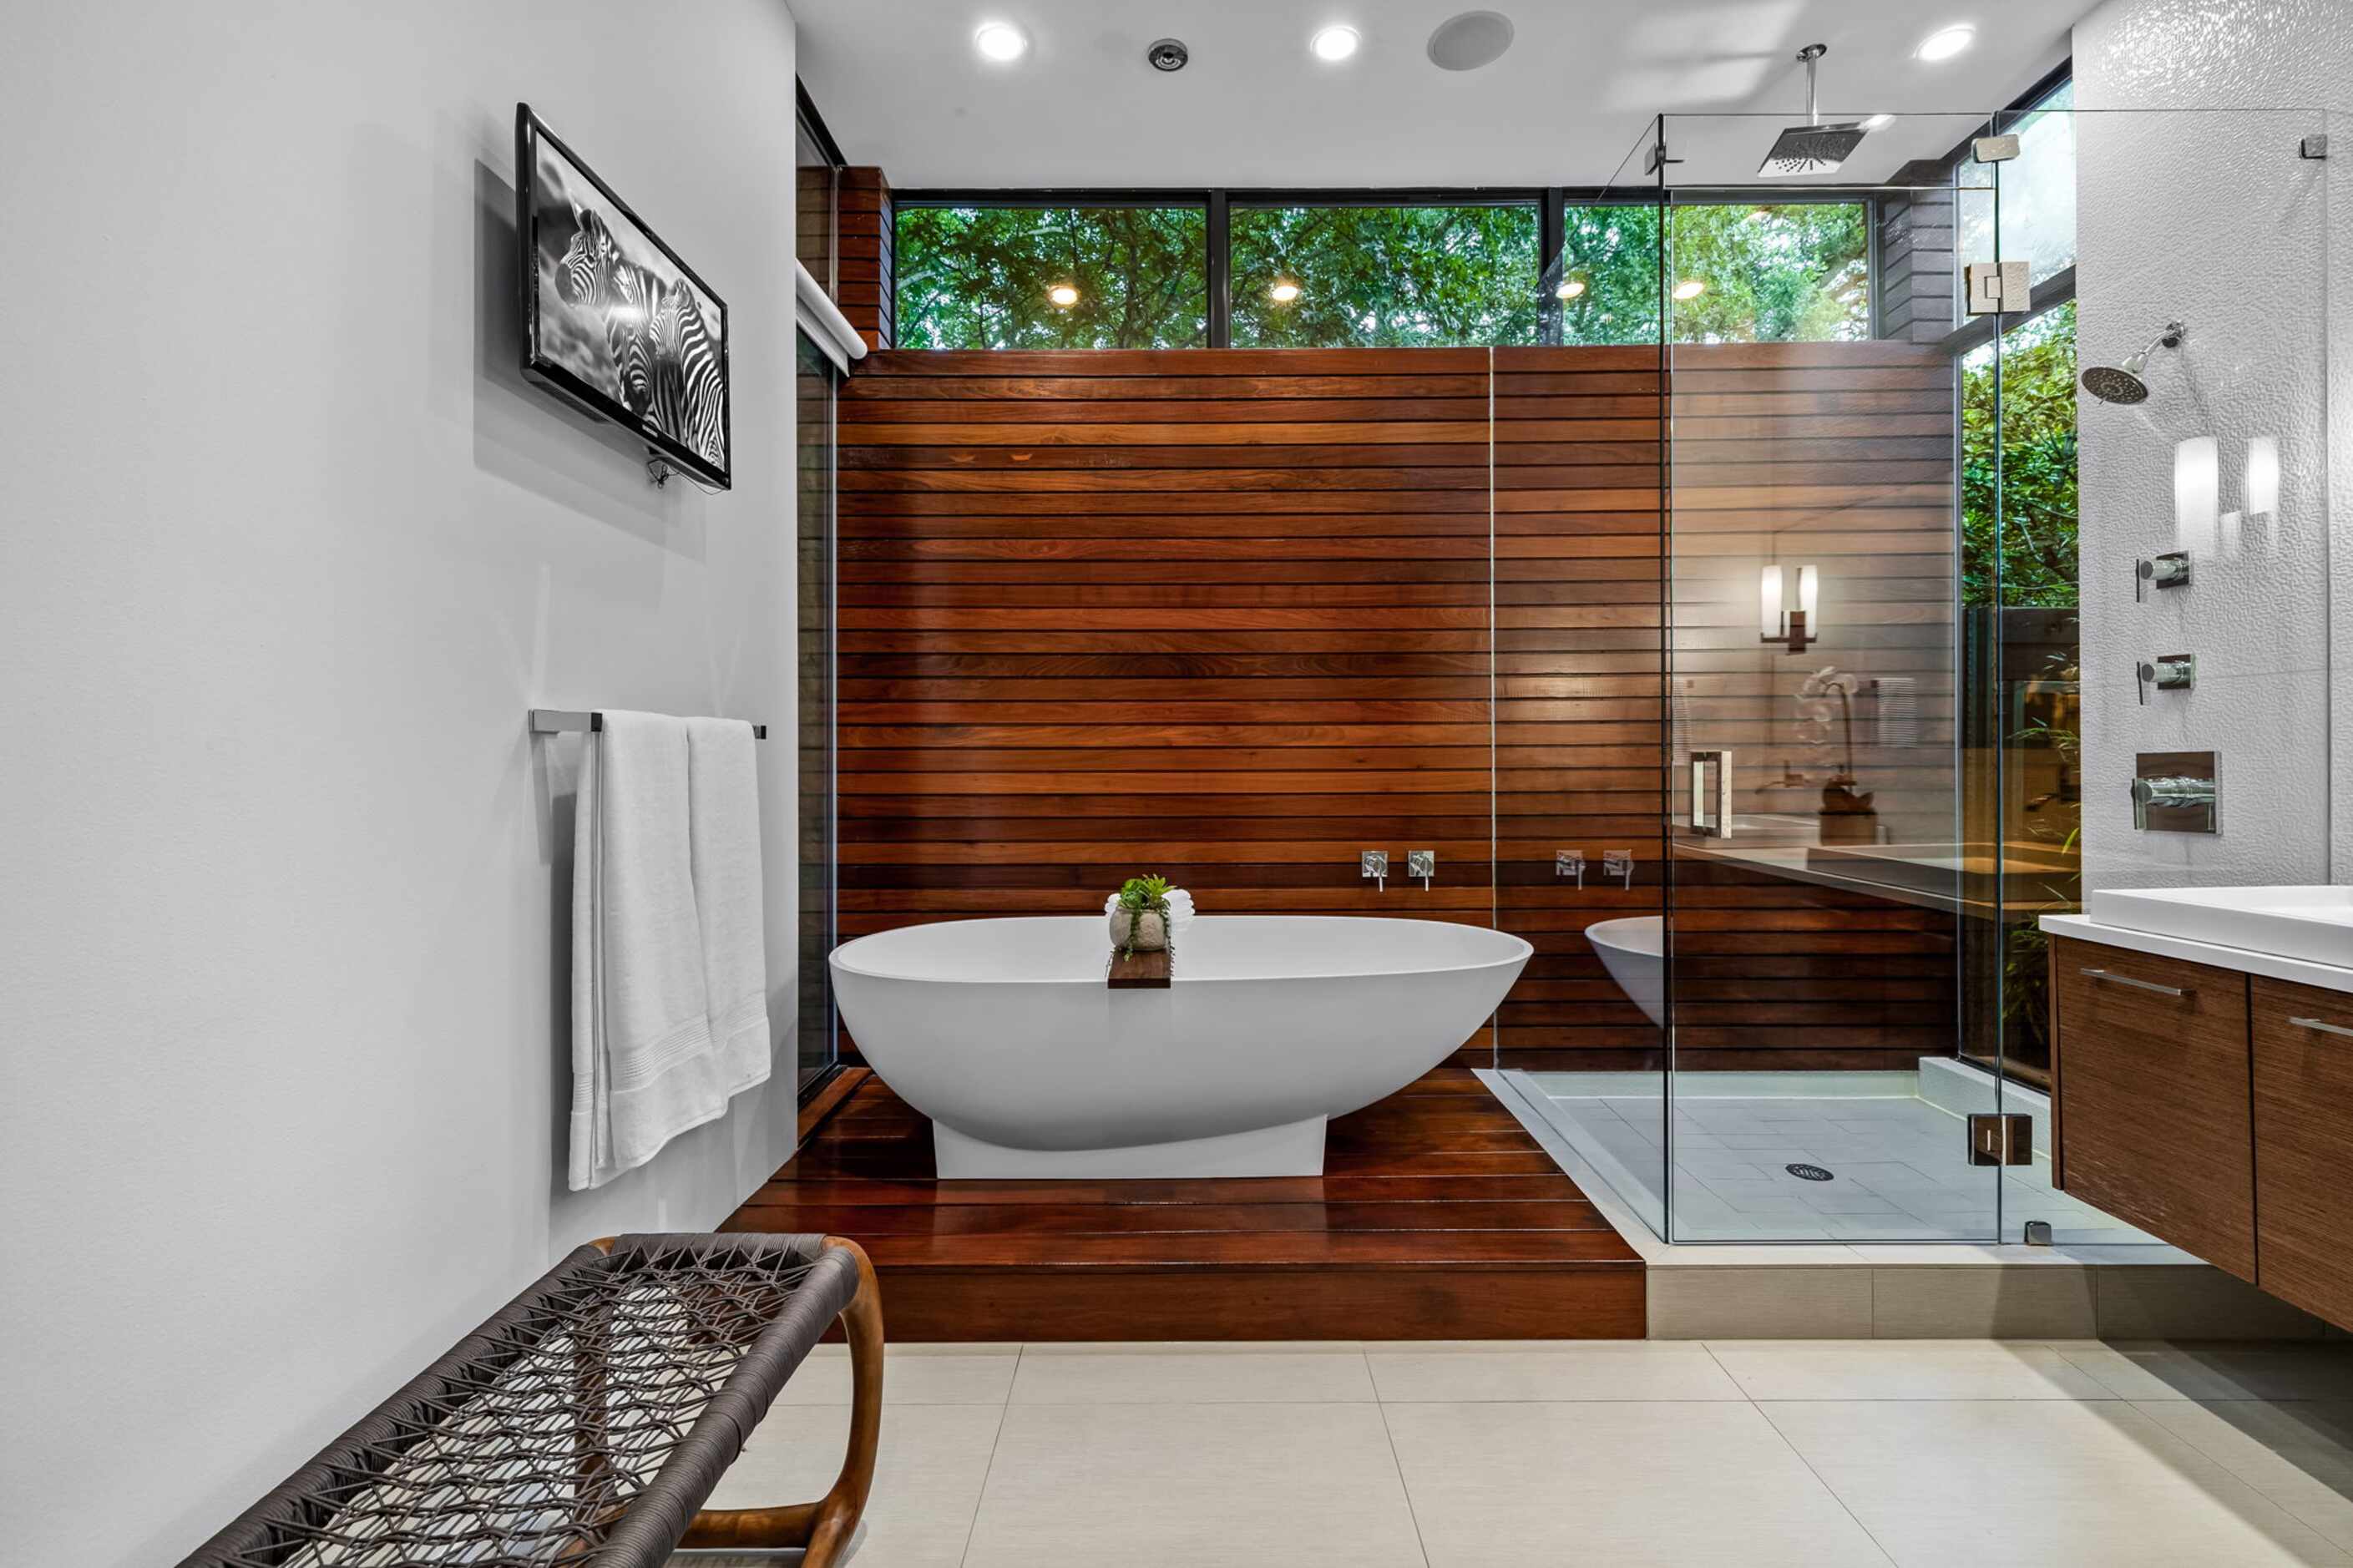 Contemporary bathroom with wood details, separate bathtub and shower